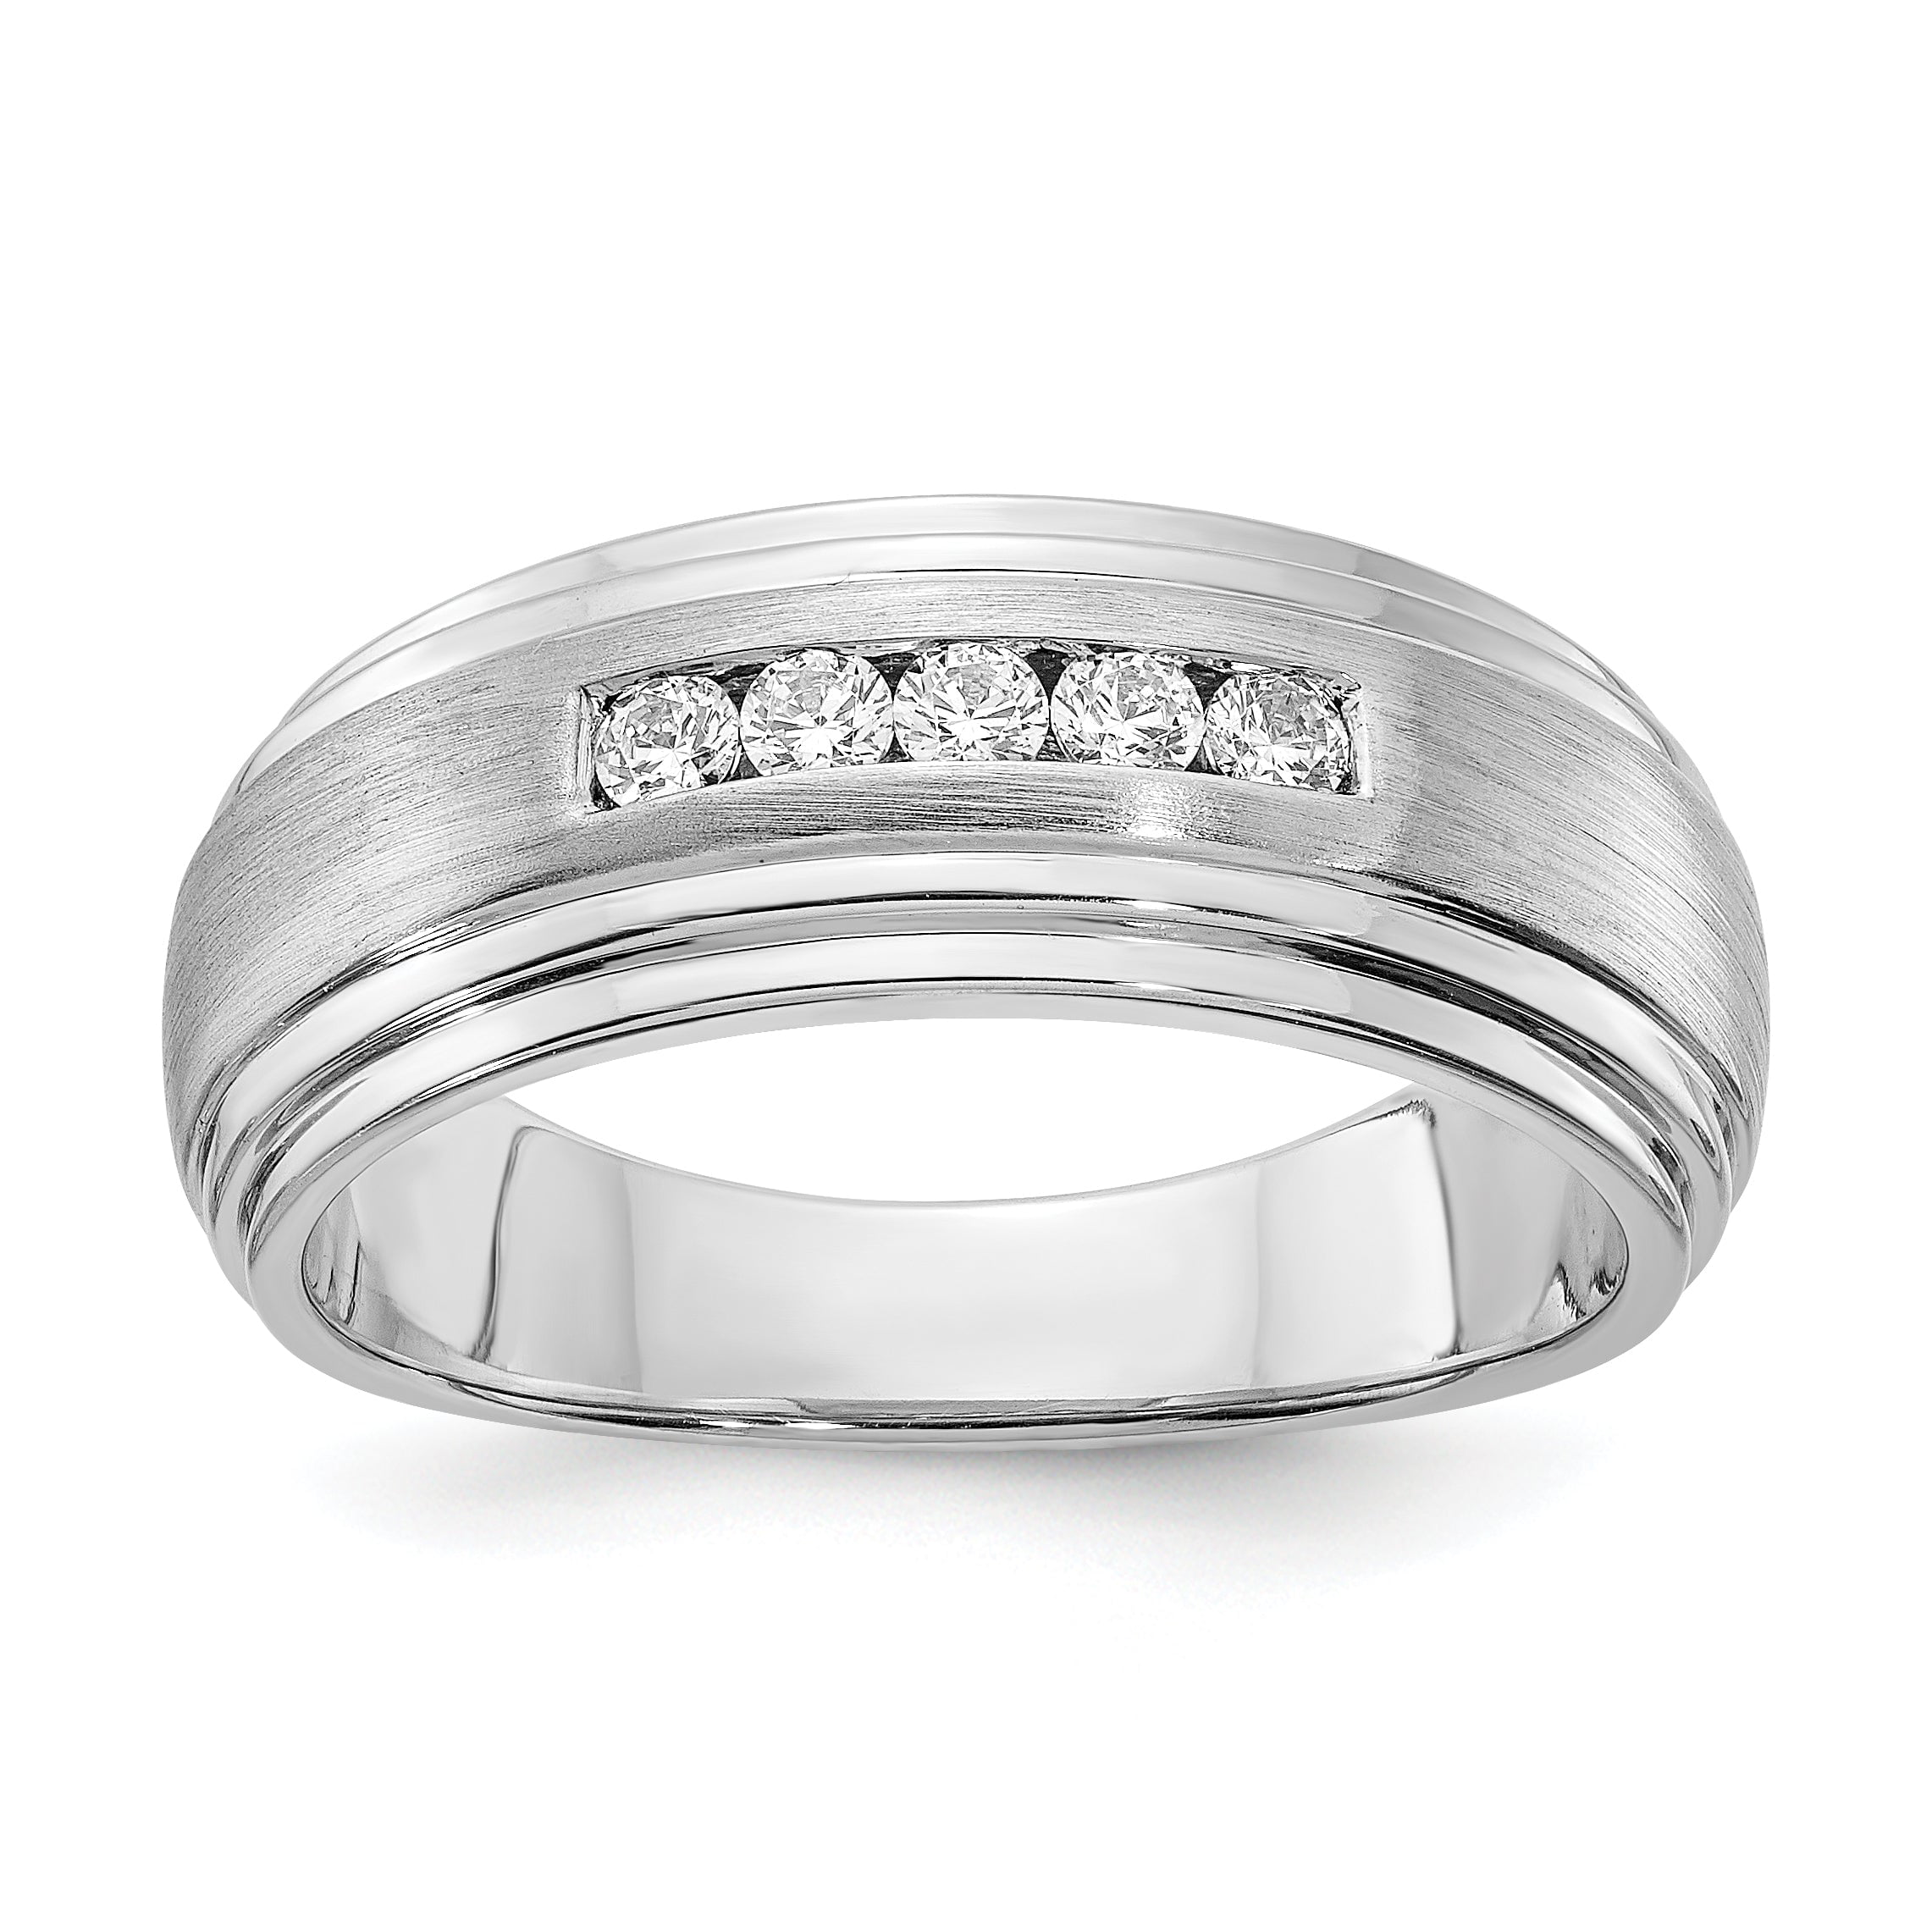 mens channel ring products for sale